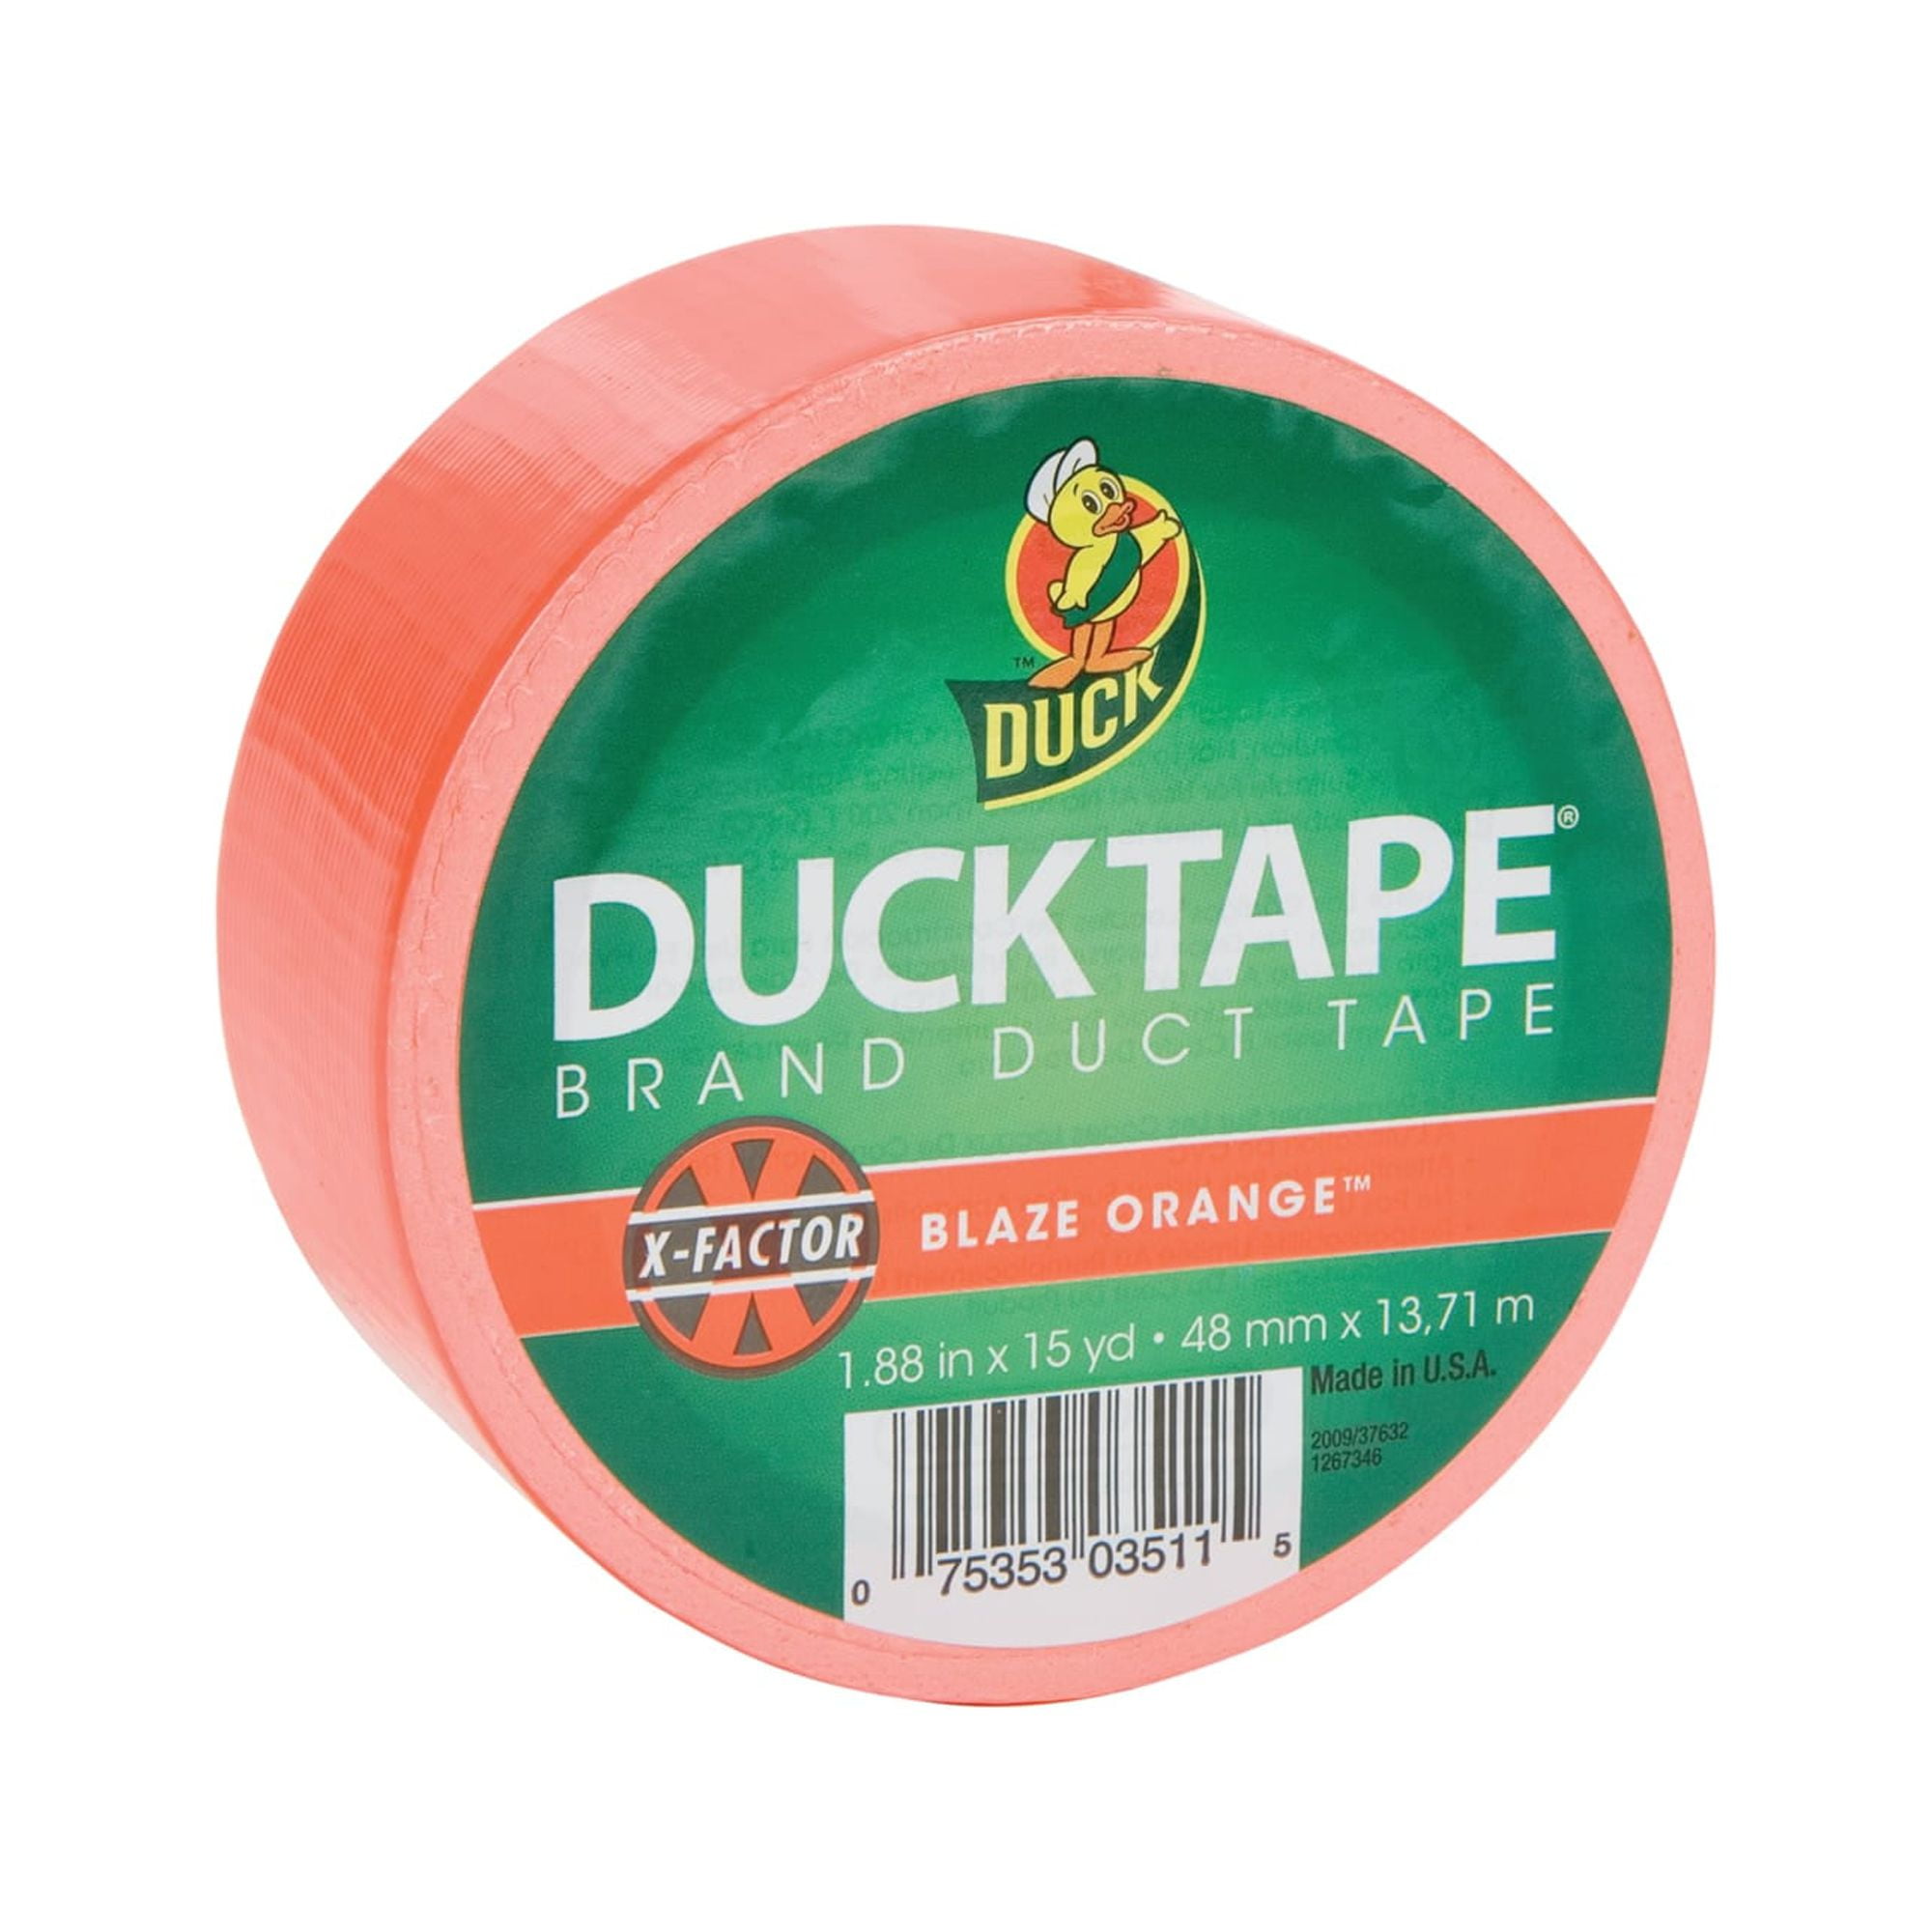 LLPT Duct Tape Premium Grade 2.36 Inches x 108 Feet x 11 Mil Residue Free Strong Waterproof Adhesive Color White